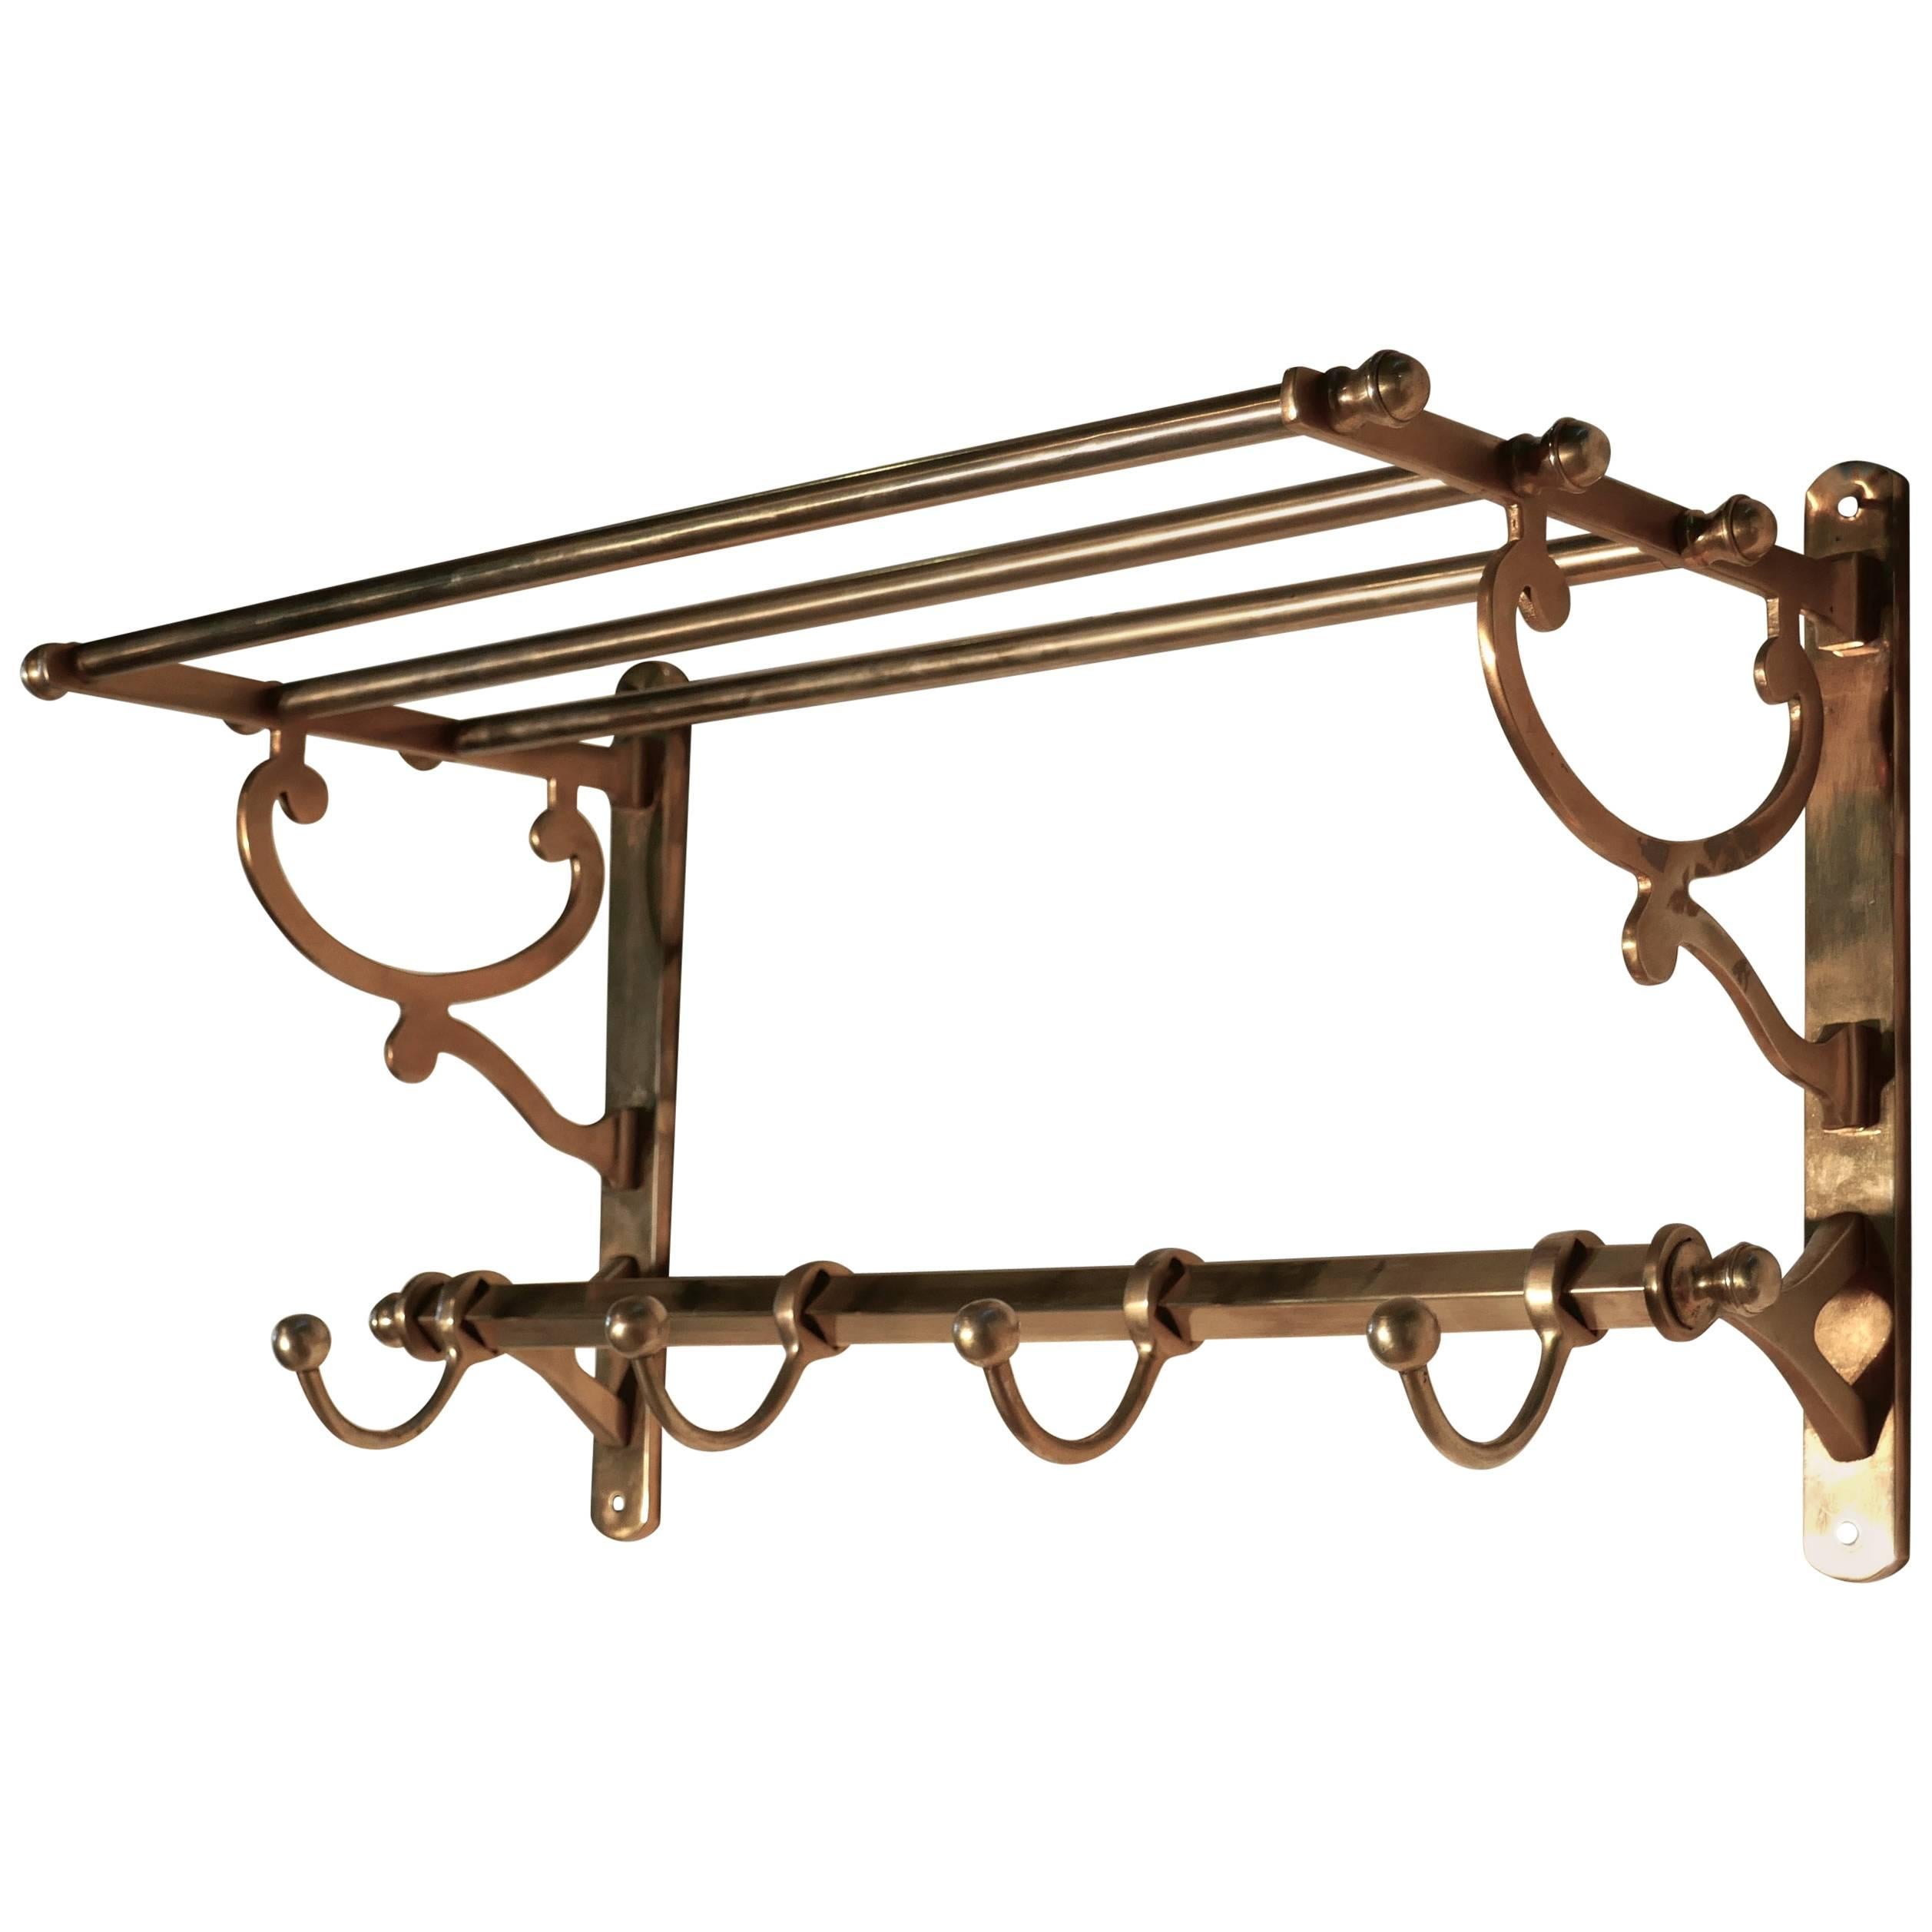 Small French Art Deco Brass Hat and Coat Rack, Pullman Railway Train Style